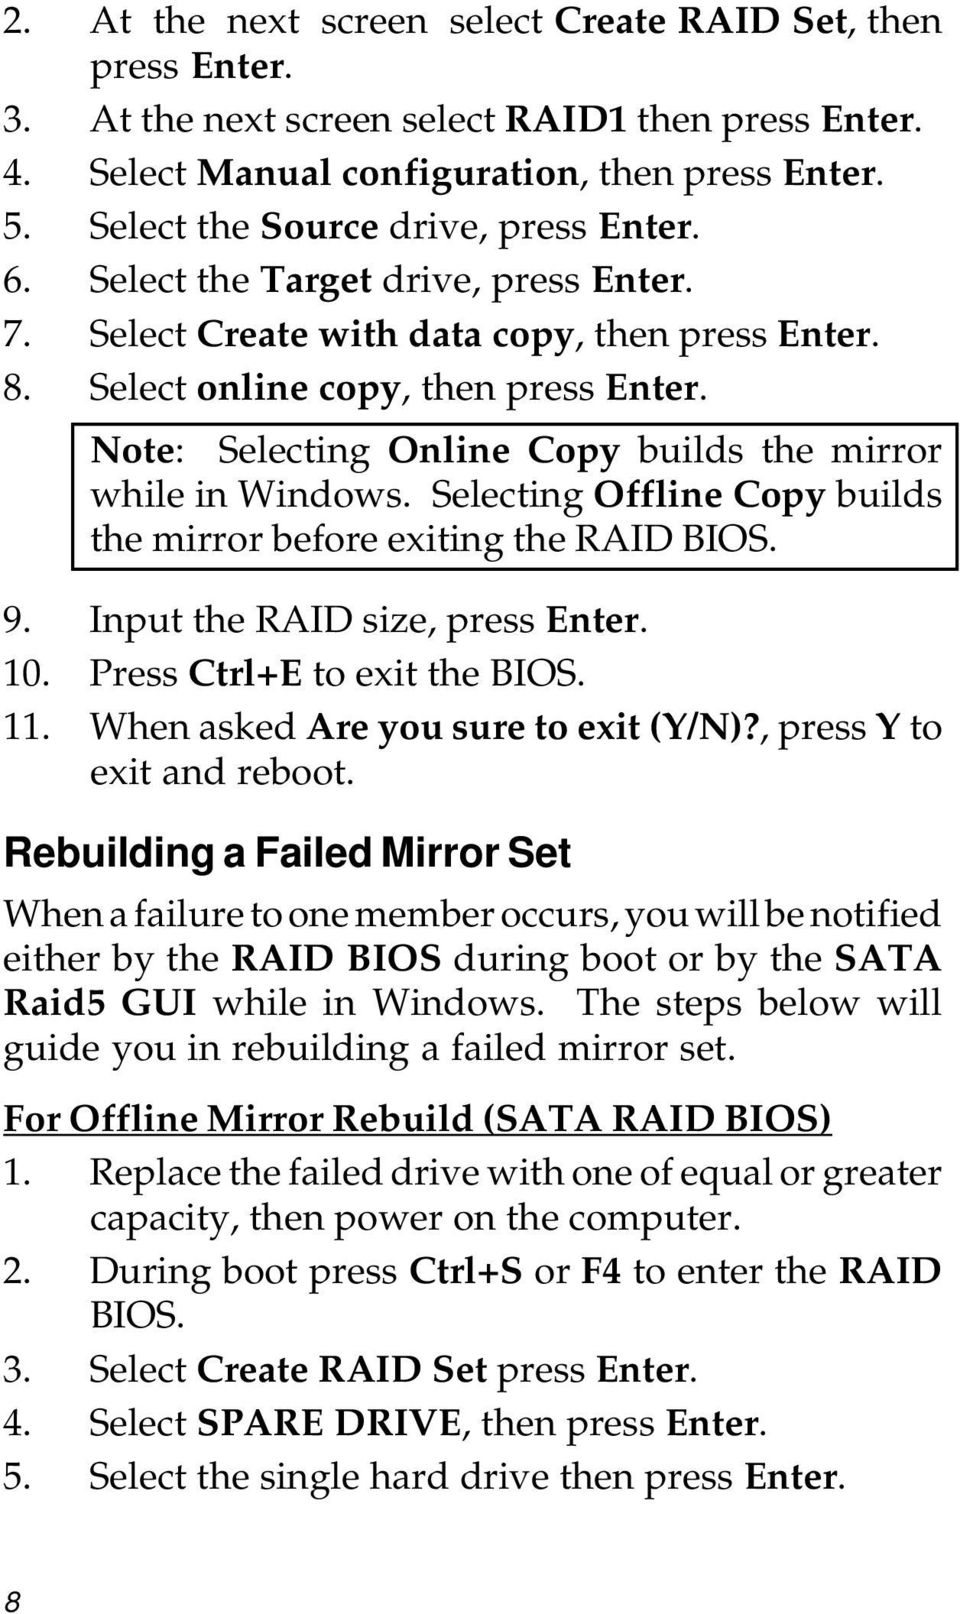 Note: Selecting Online Copy builds the mirror while in Windows. Selecting Offline Copy builds the mirror before exiting the RAID BIOS. 9. Input the RAID size, press Enter. 10.